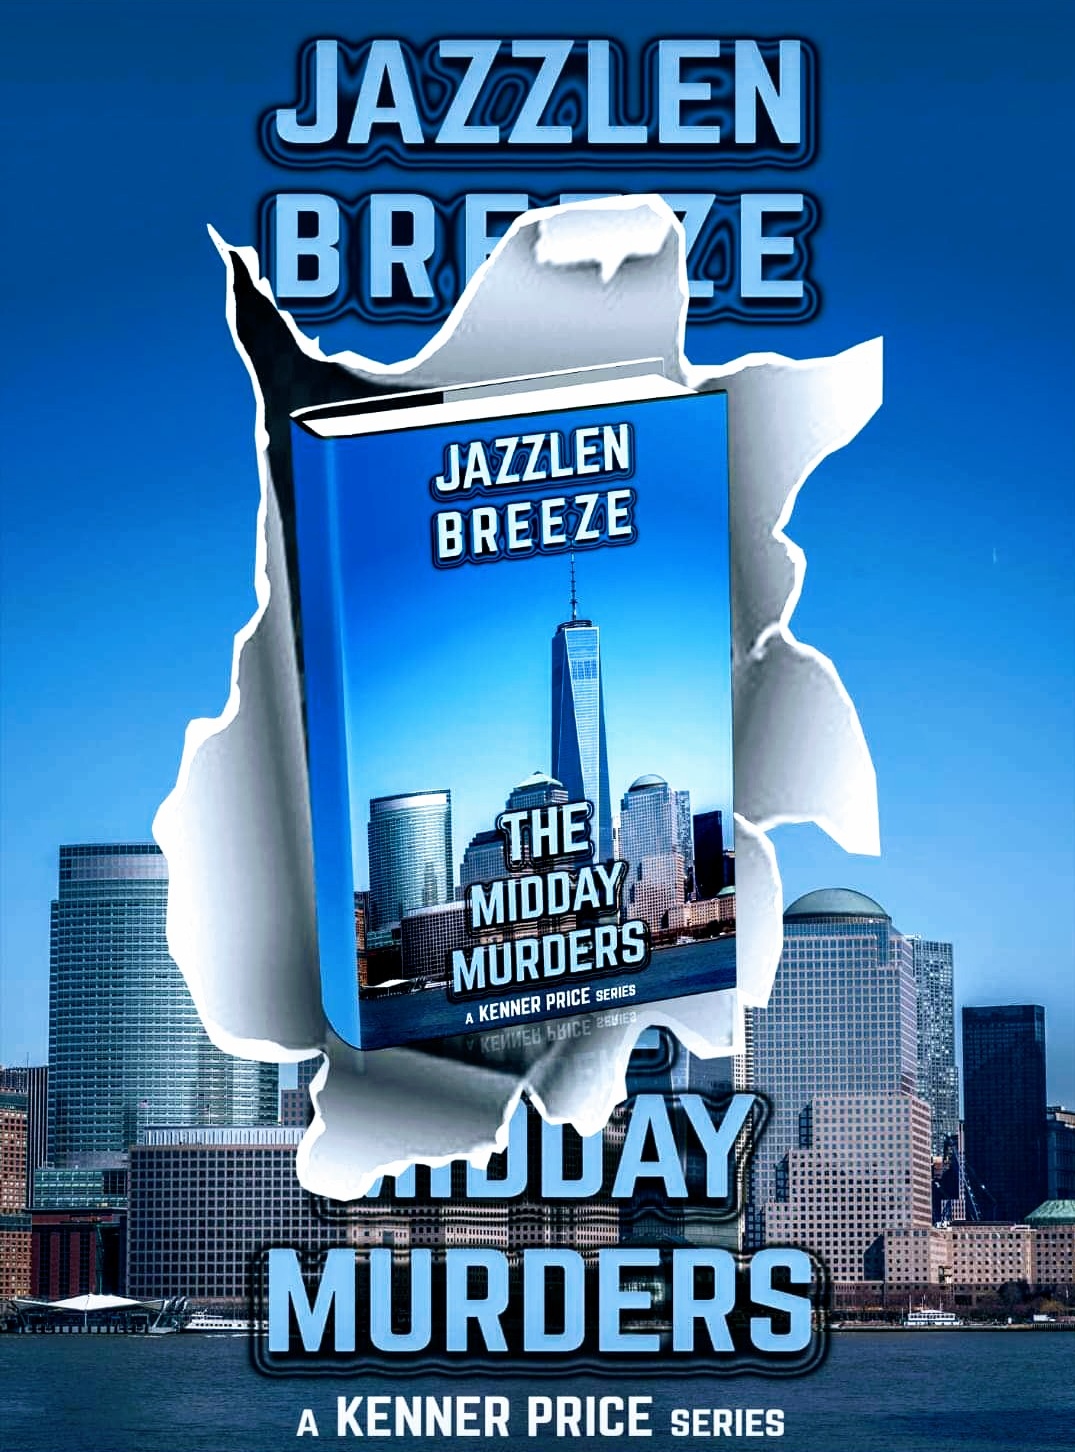 FREE: The Midday Murders by Jazzlen Brreeze